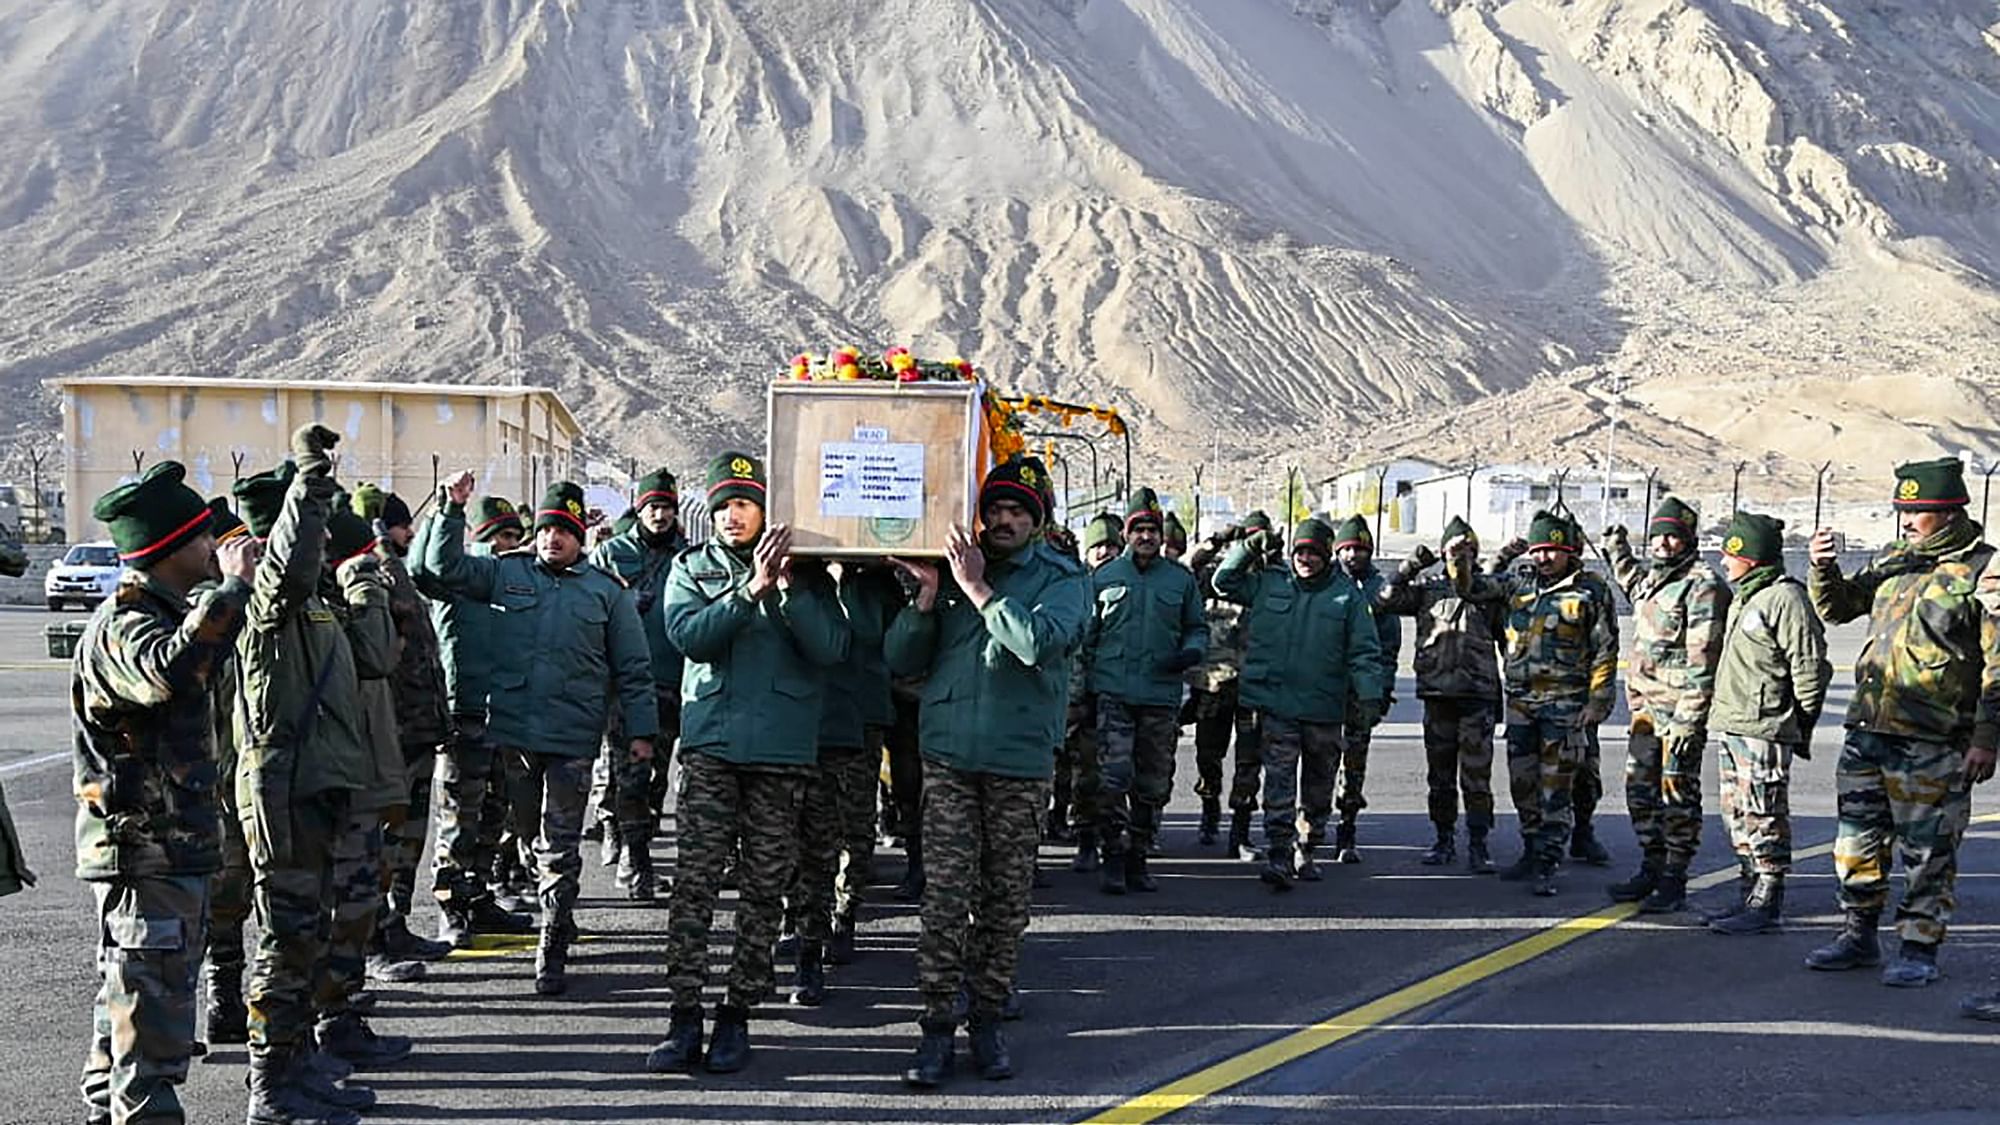 <div class="paragraphs"><p>Army personnel pay tribute to Agniveer Gawate Akshay Laxman, an operator who lost his life in the service of duty amid the terrains of the Siachen glacier.</p></div>